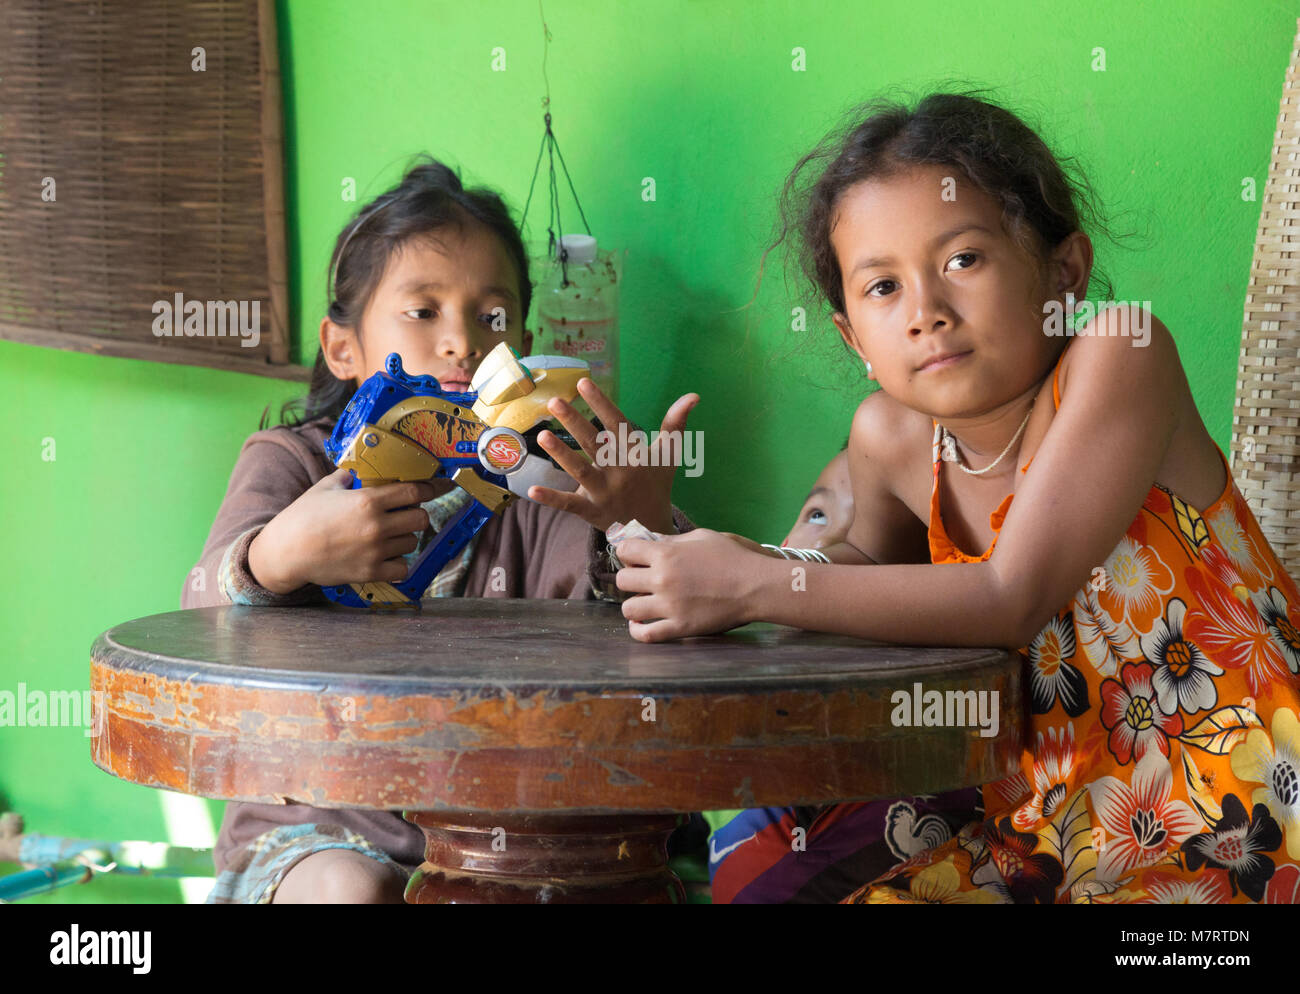 Cambodia children playing with toys,- two girls aged 8-10 years, Phnom  Penh, Cambodia, Asia Stock Photo - Alamy